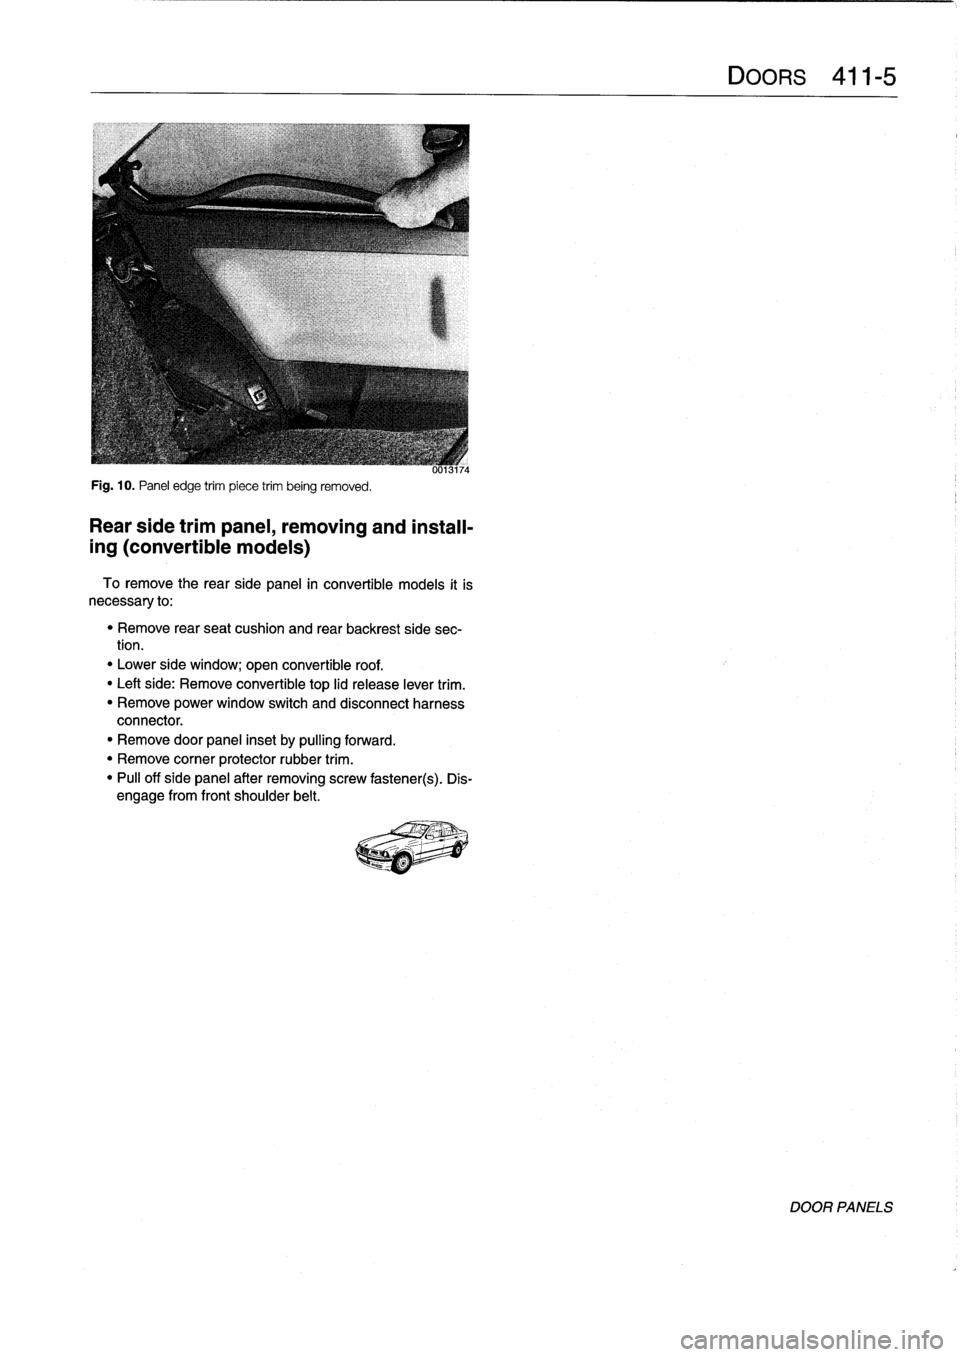 BMW 318i 1997 E36 Workshop Manual 
Fig
.
10
.
Panel
edge
trim
piece
trim
being
removed
.

Rear
side
trimpanel,
removing
and
install-

ing
(convertible
models)

To
remove
the
rearside
panel
in
convertible
models
it
is
necessary
to
:

"